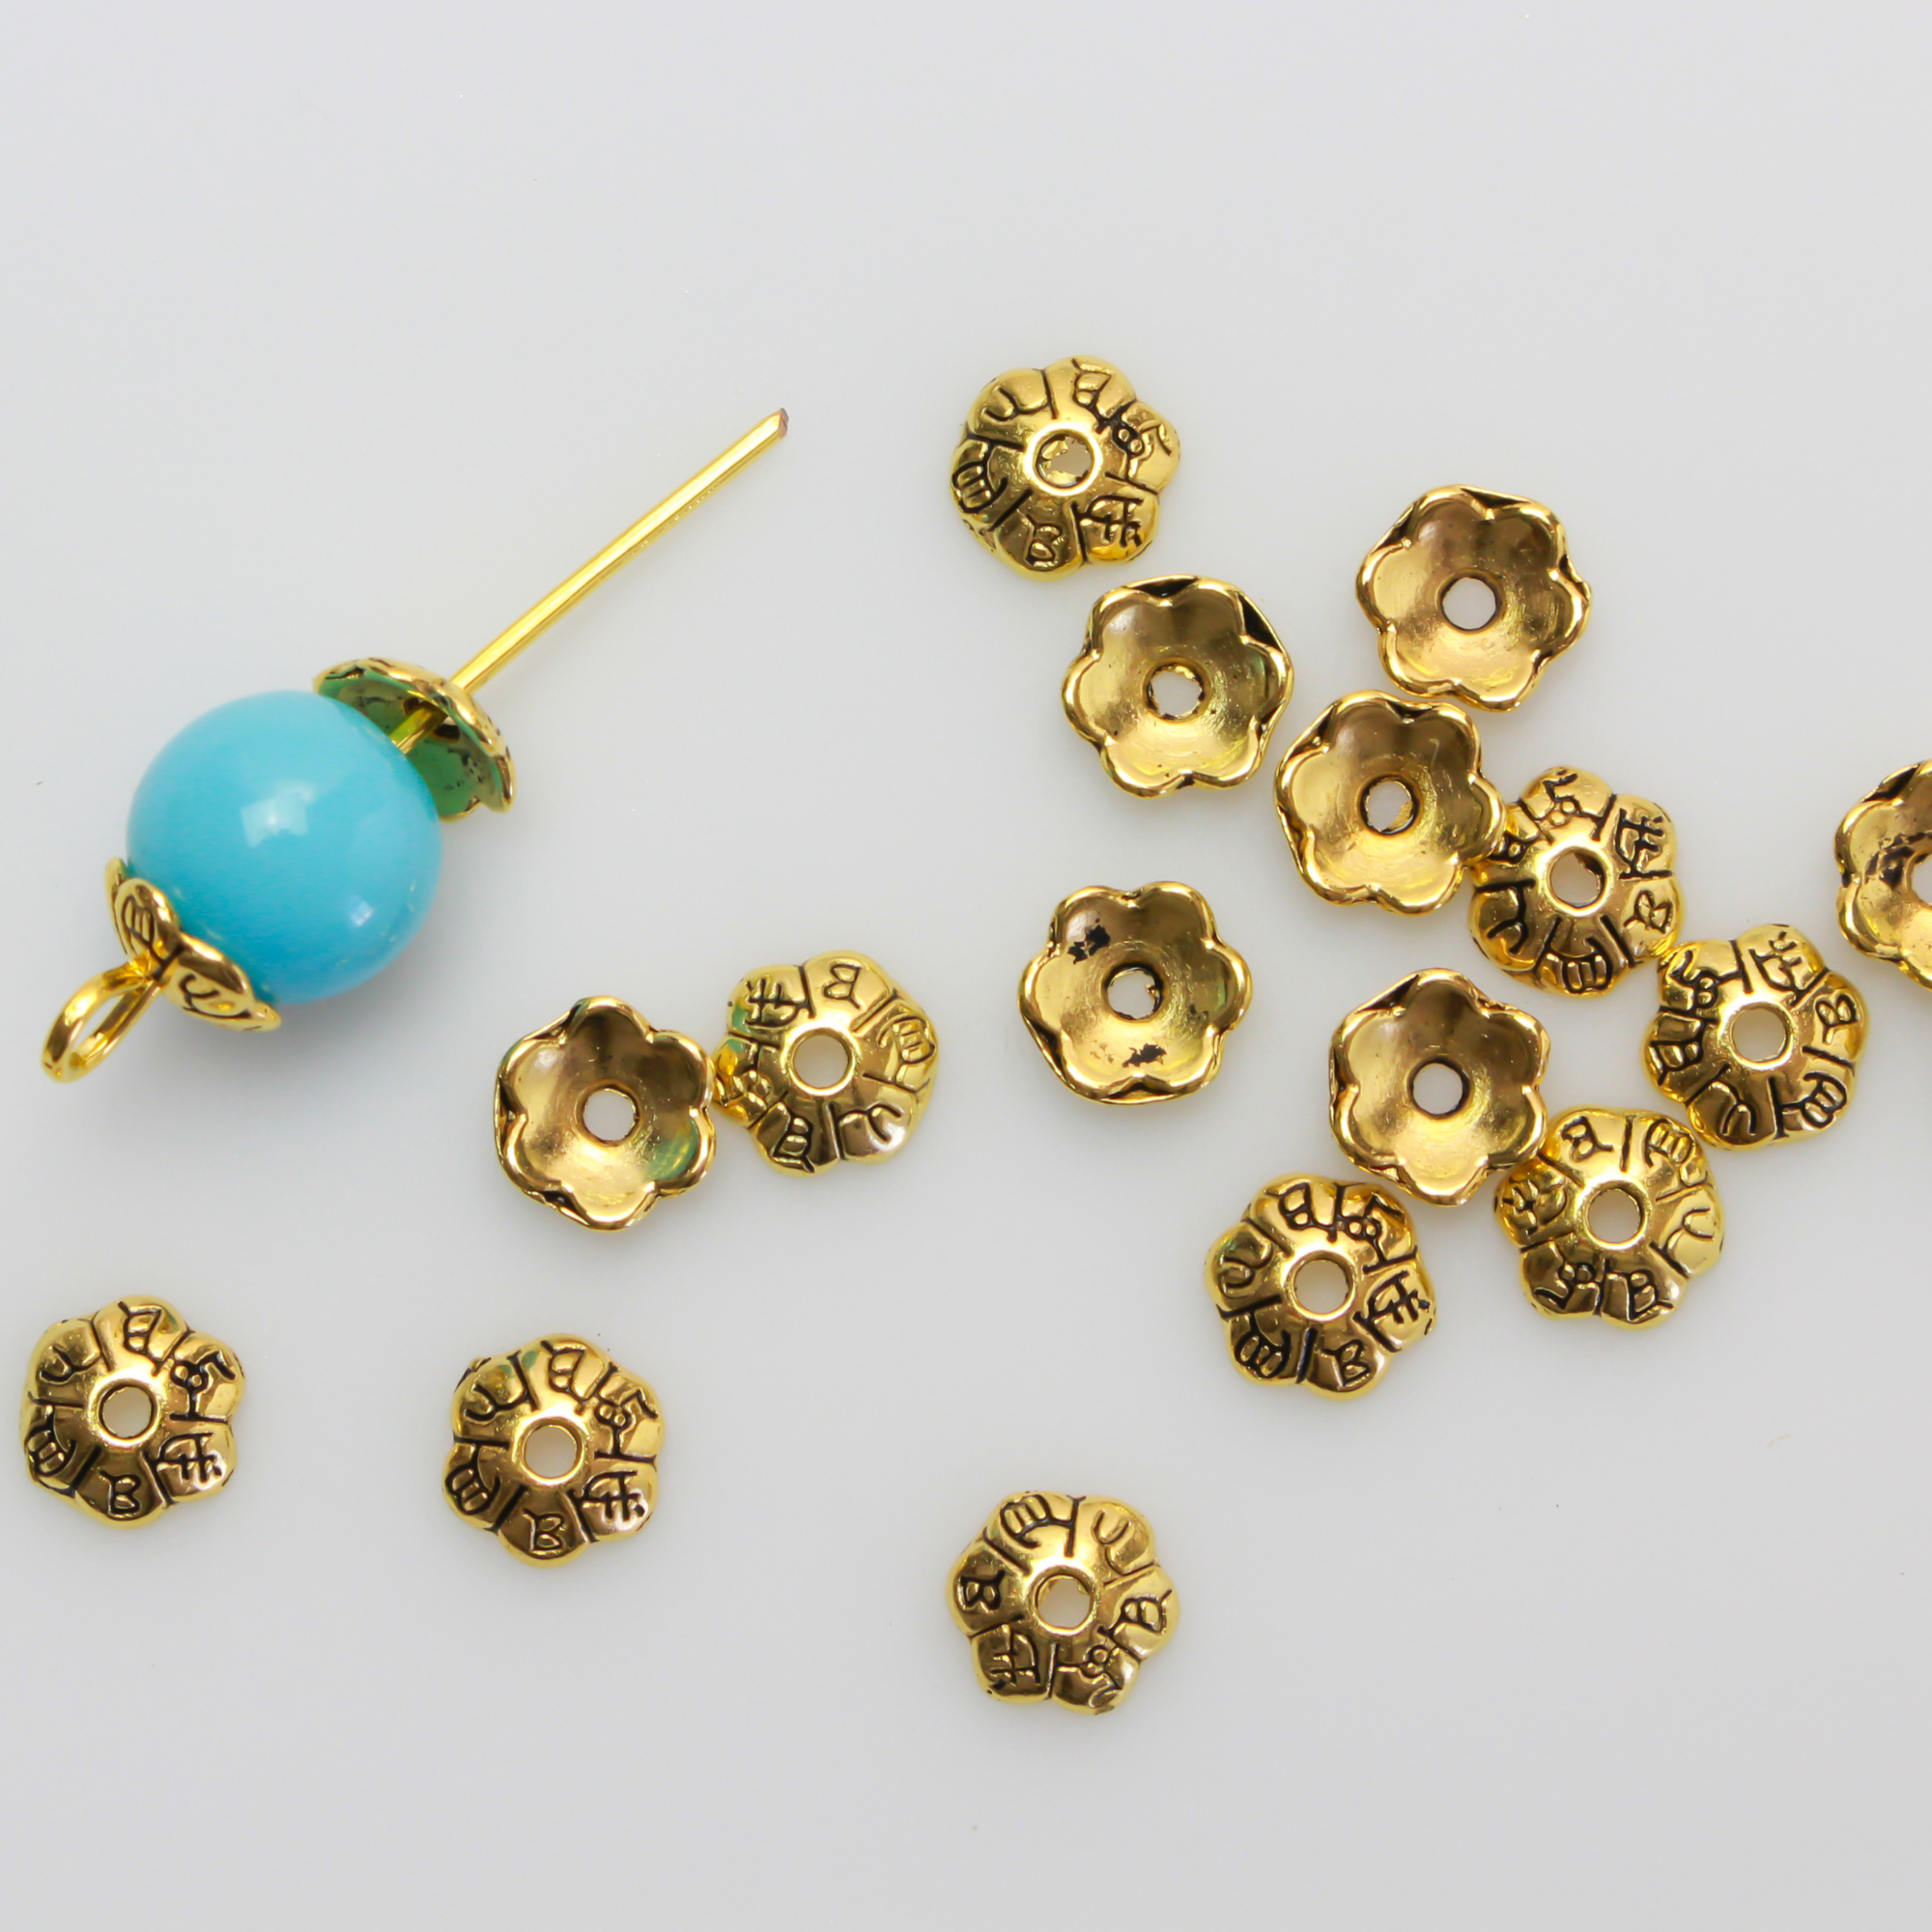 5mm Tiny Flower Bead Caps Gold Filled (C95GF) - 20 pieces-C9